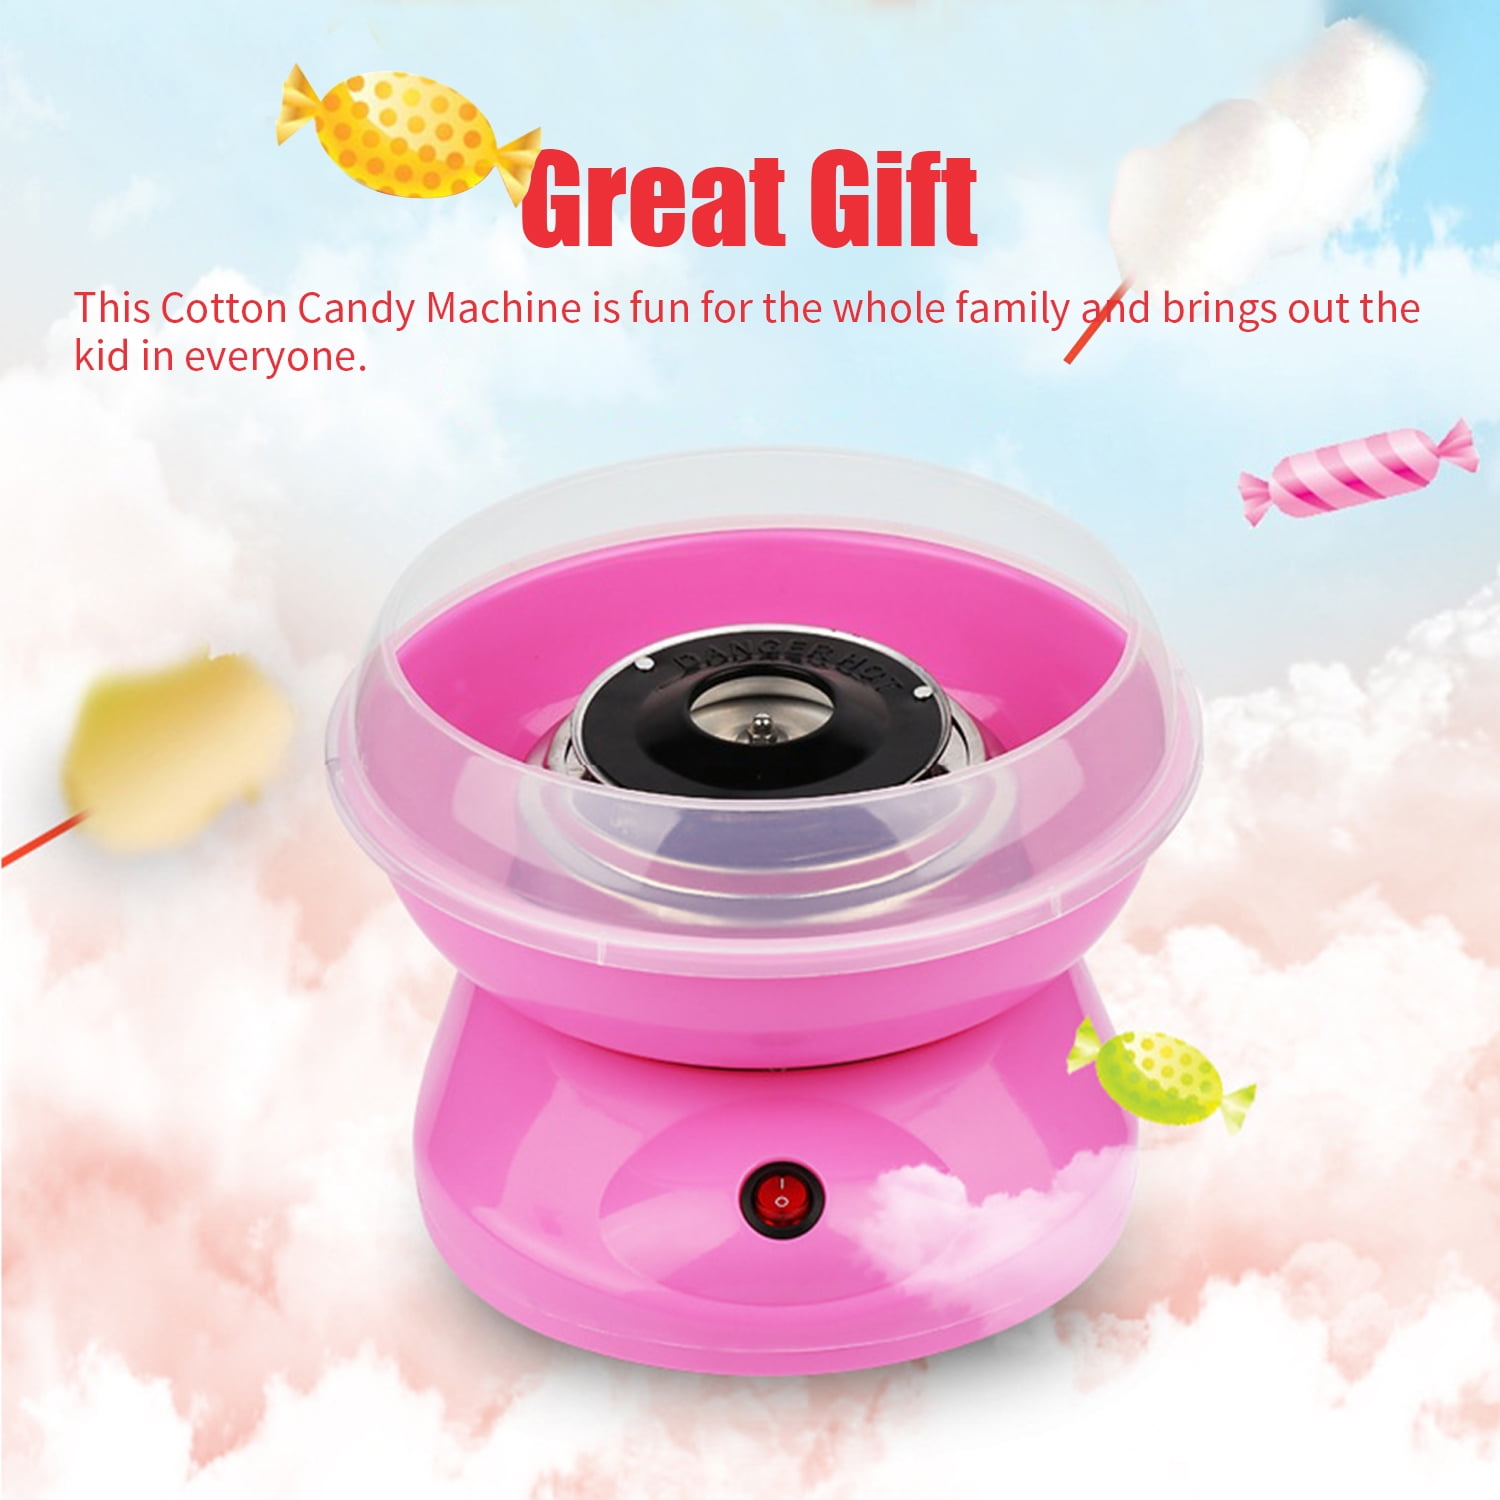 Professional Cotton Sugar Candy Floss Maker Machine Home Kids Party Sweet Gift